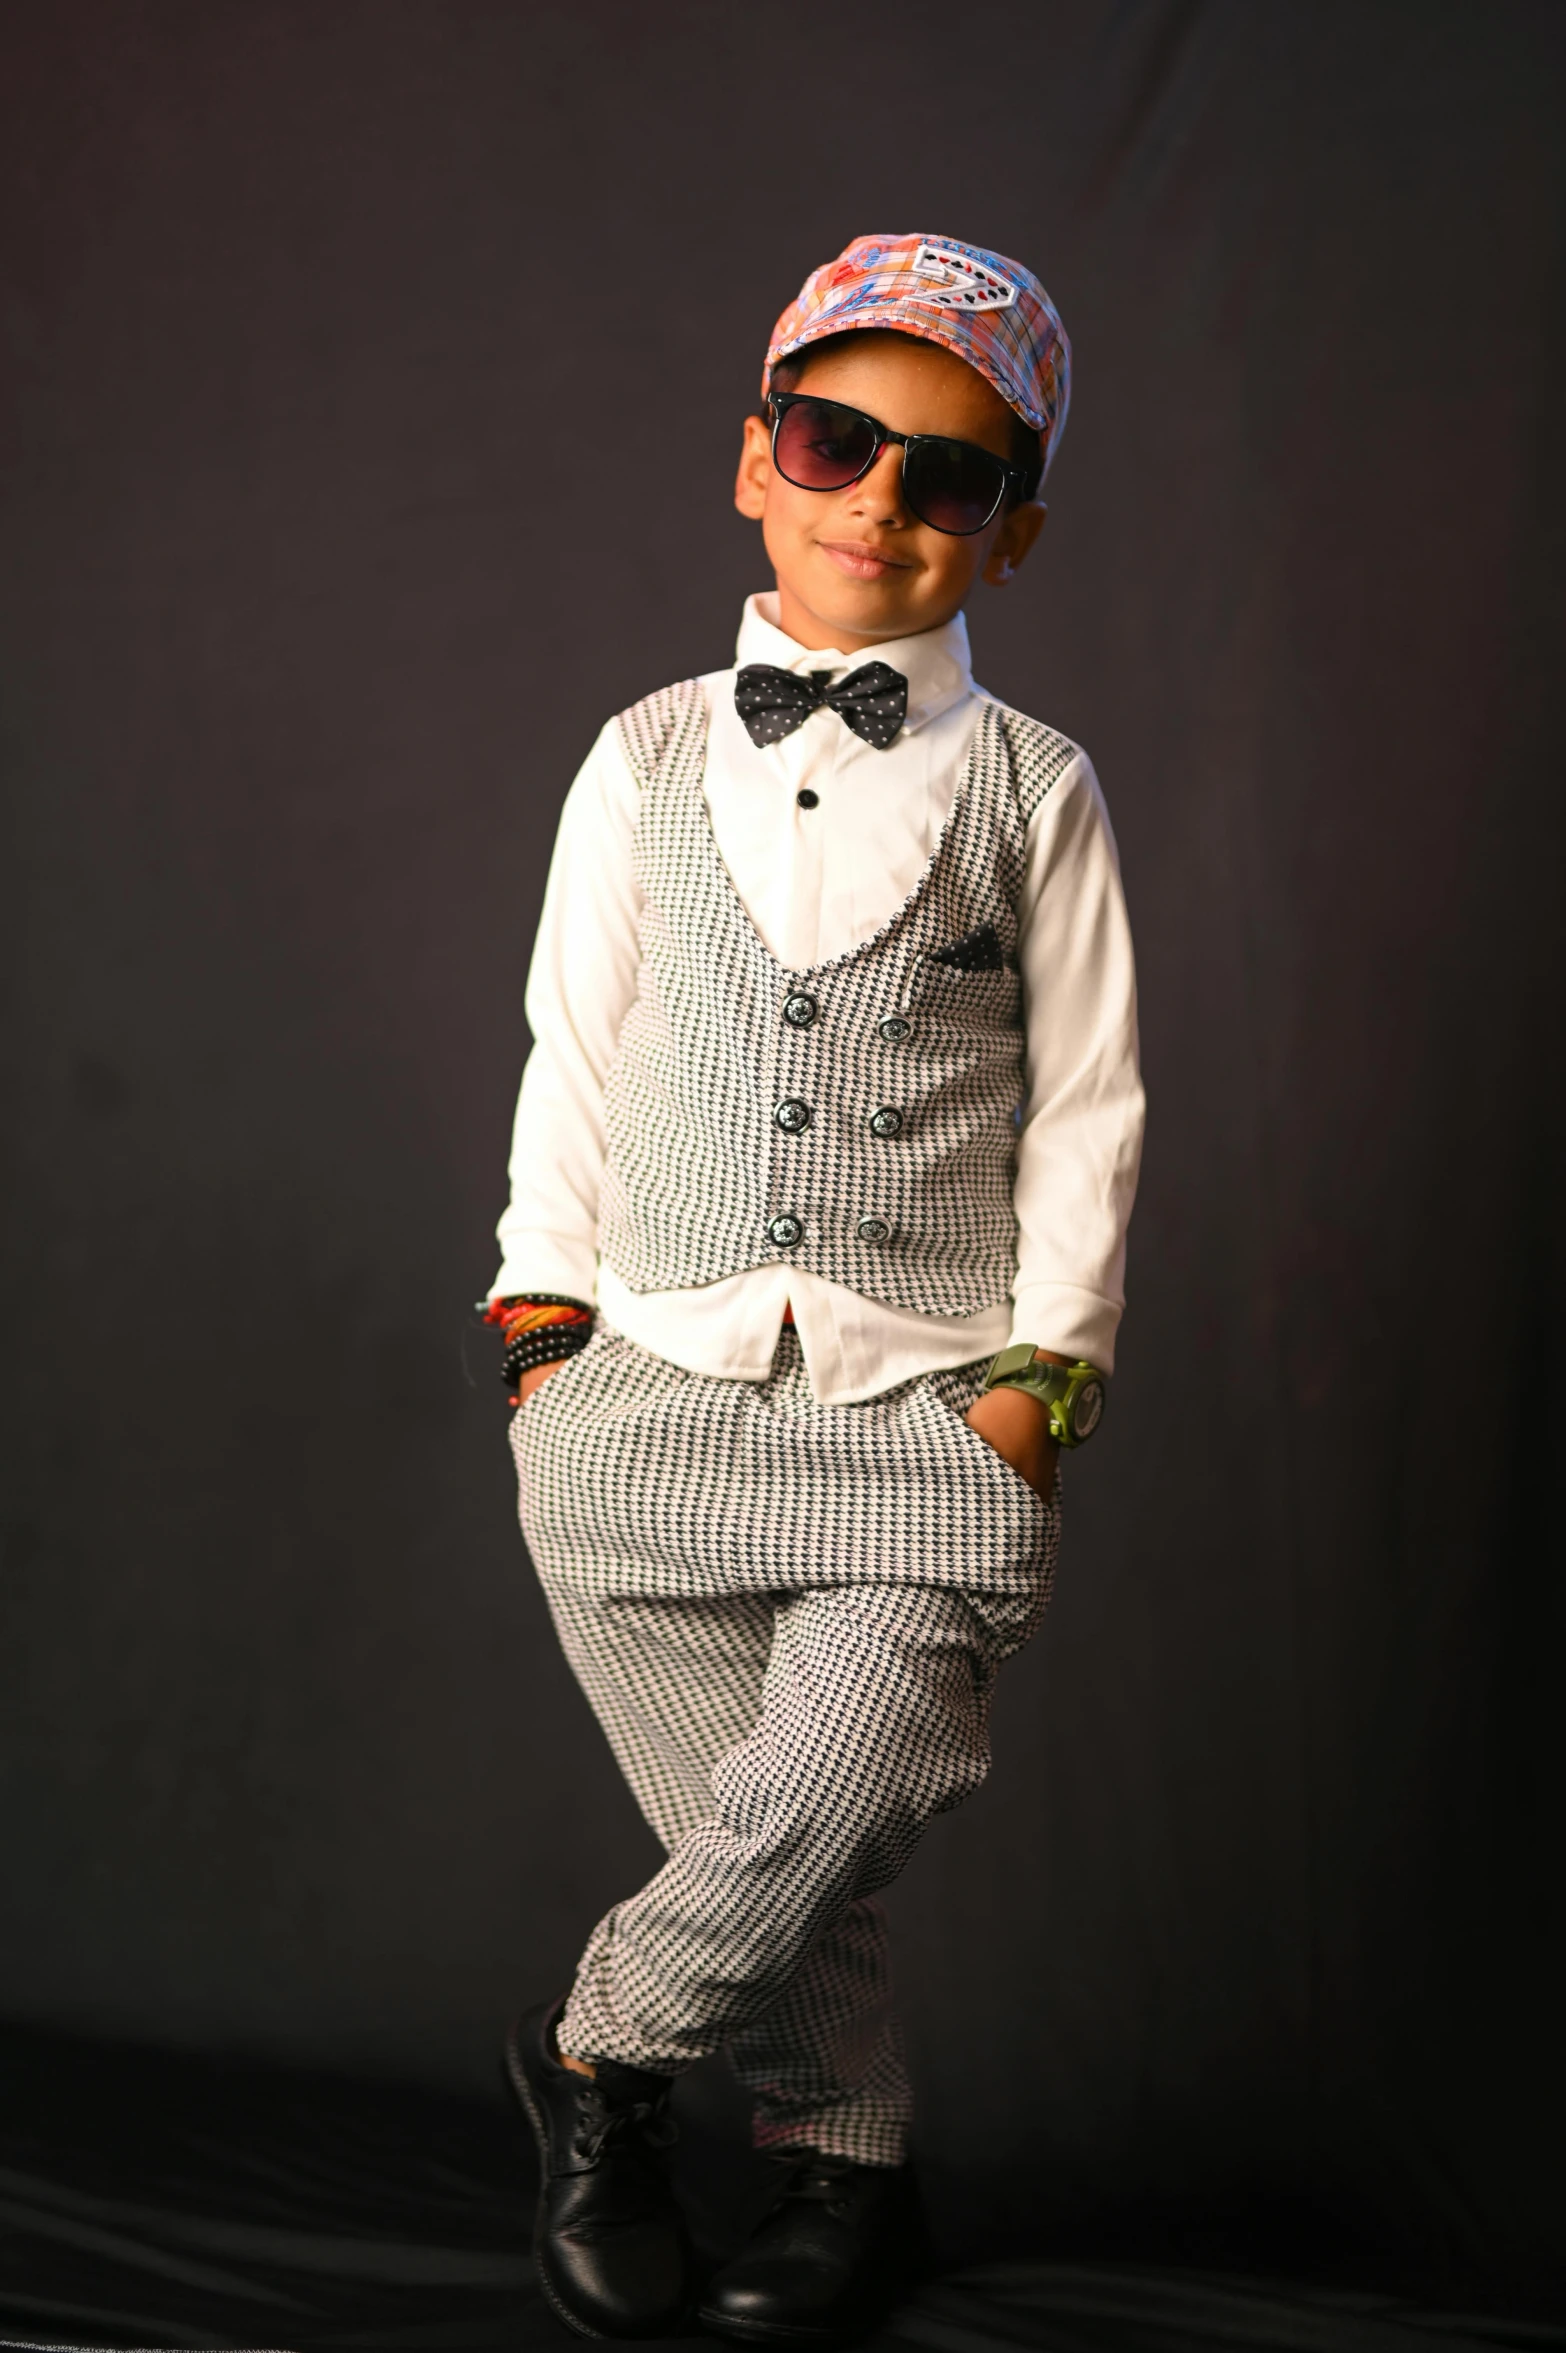 a boy in a tuxedo poses for a picture